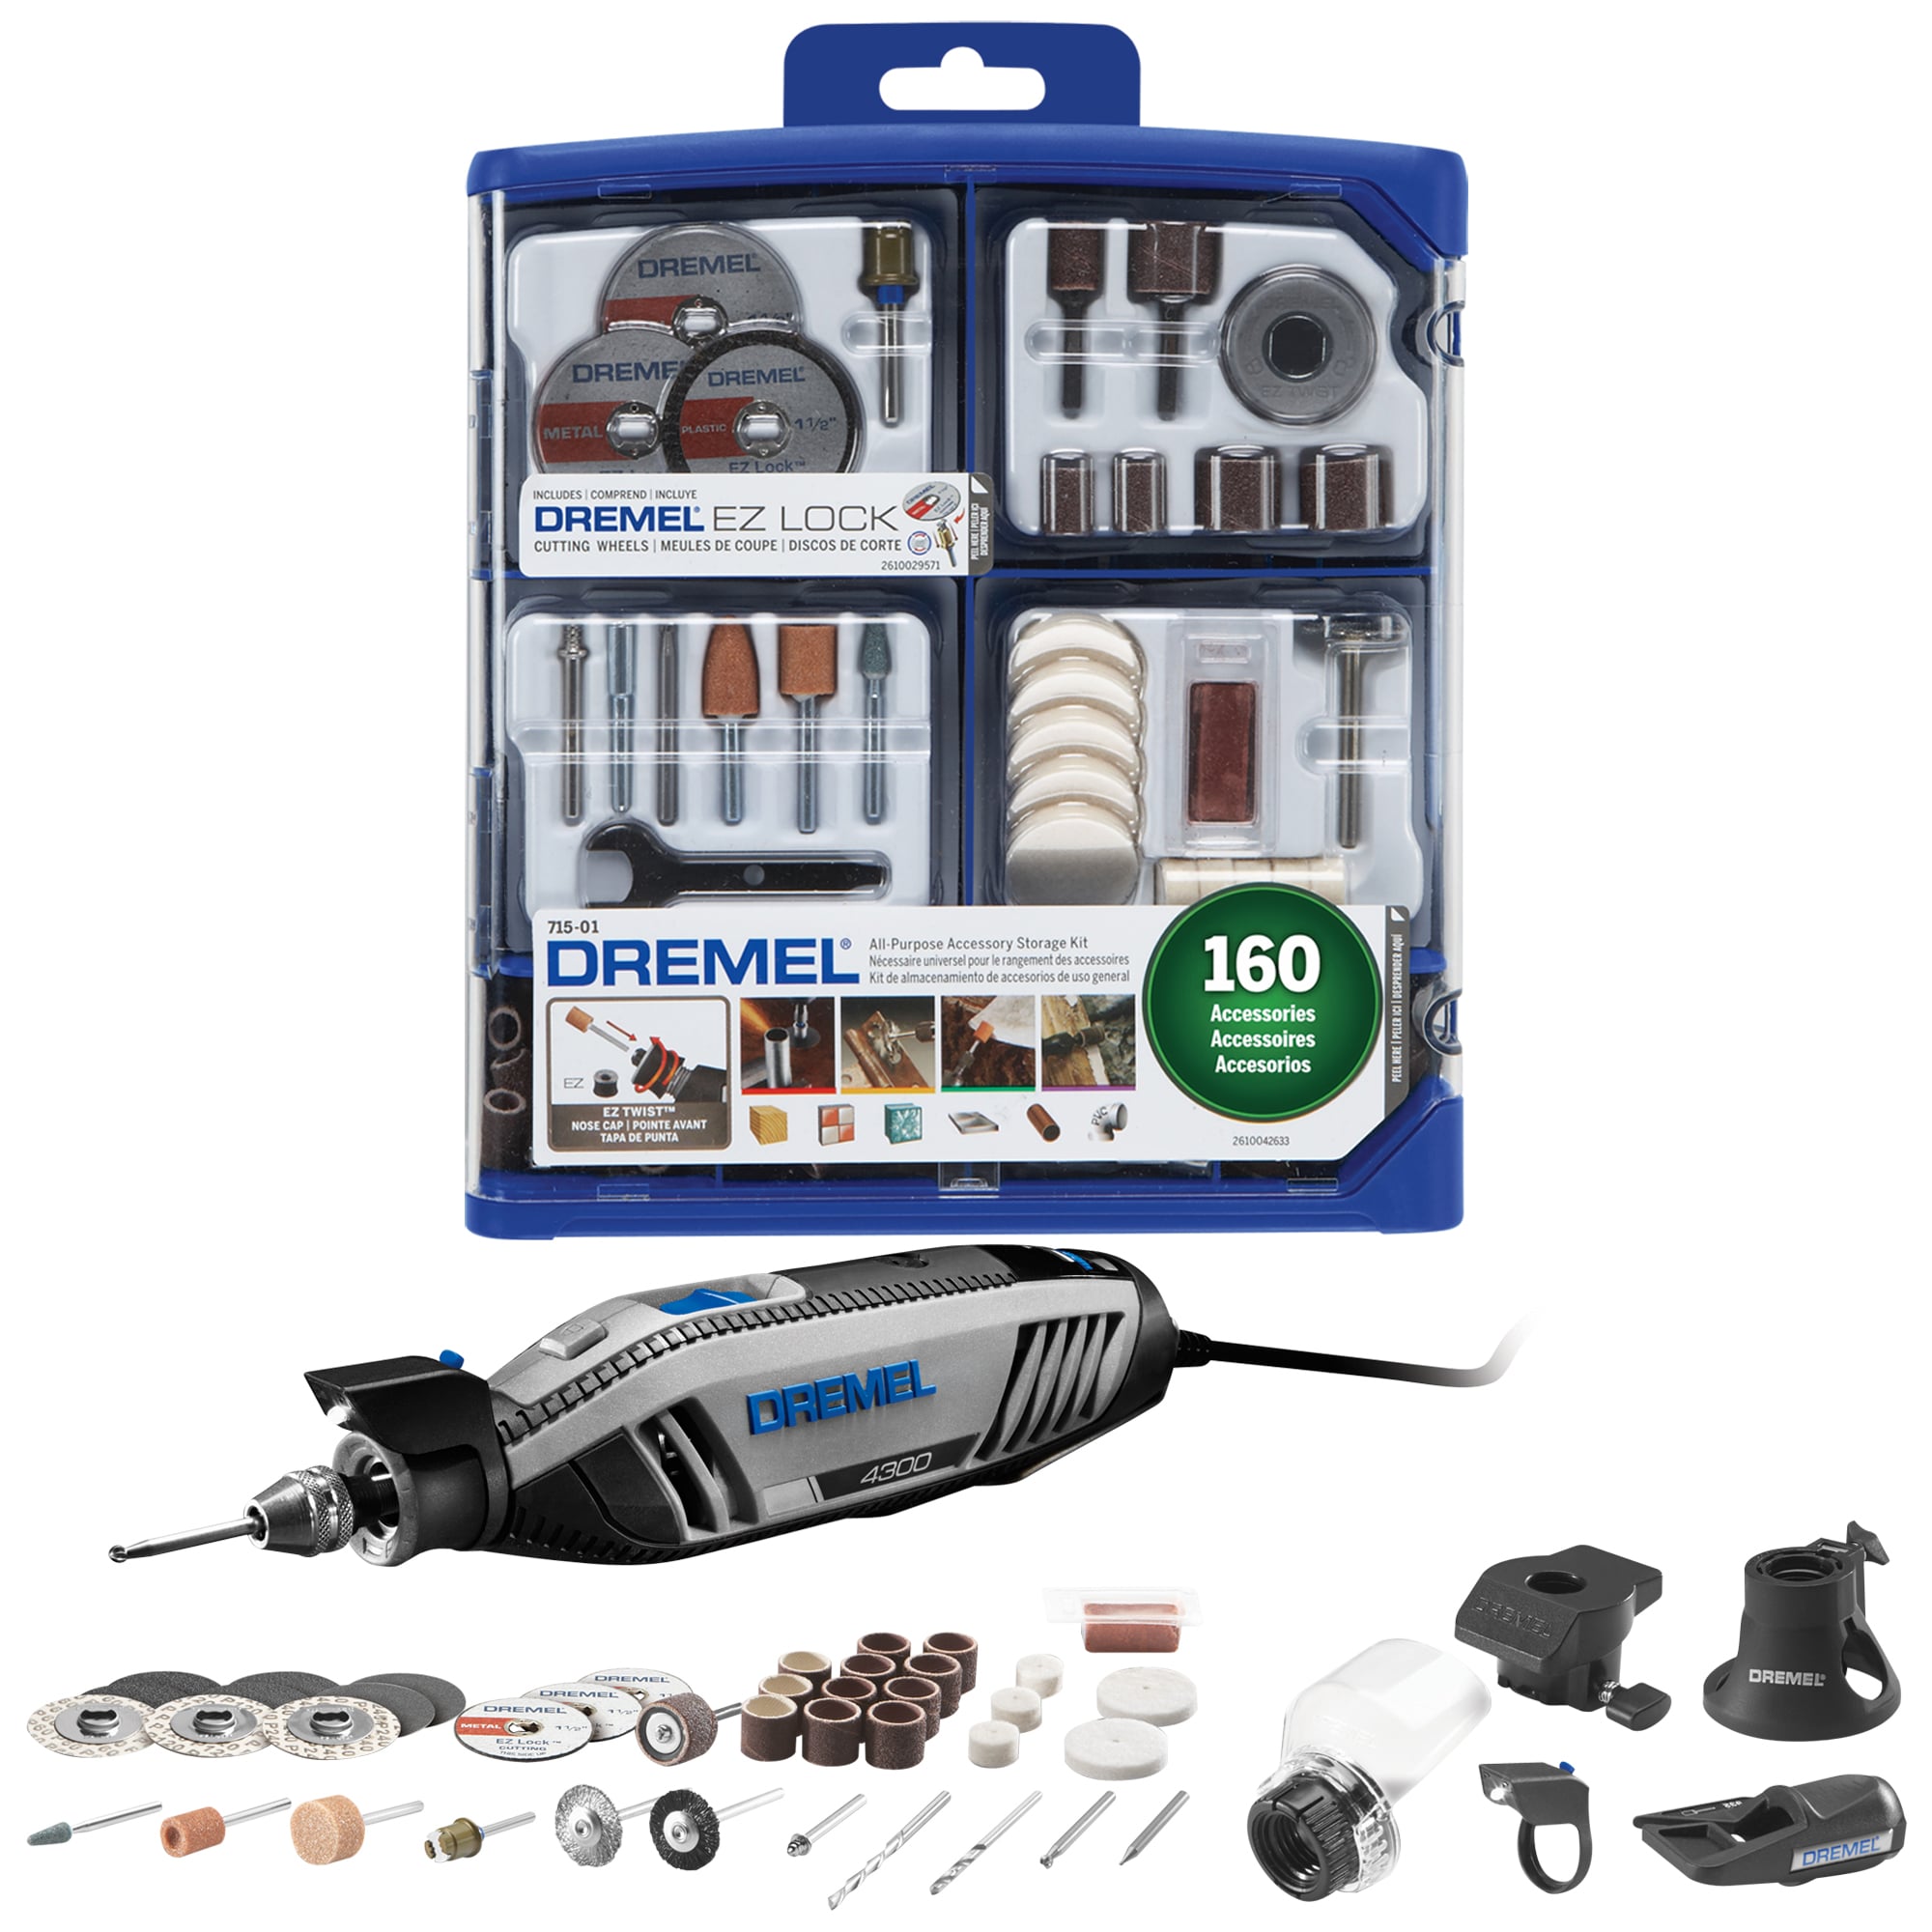 Shop Dremel Corded Variable Speed Rotary Tool with 5 and 40 + 160-Piece Accessory Kit at Lowes.com